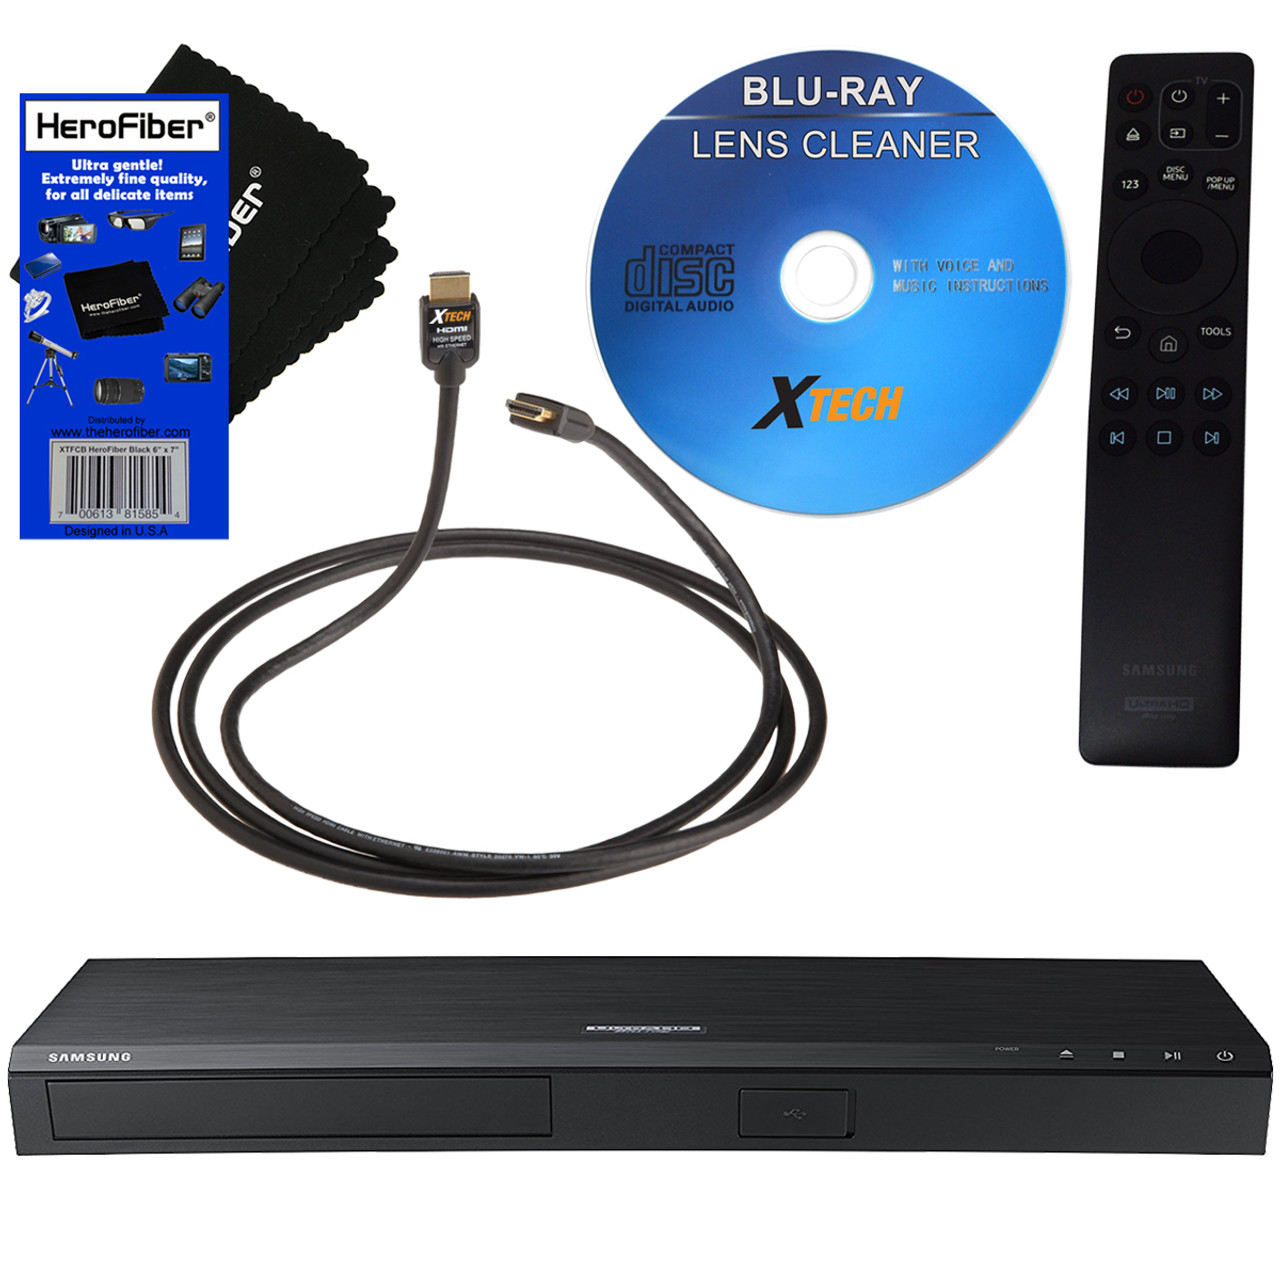 Samsung Ubd M8500 4k Uhd Blu Ray Disc Player Remote Control Xtech Blu Ray Maintenance Kit Xtech High Speed Hdmi Cable W Ethernet Herofiber Ultra Gentle Cleaning Cloth Hot Deals Electronics